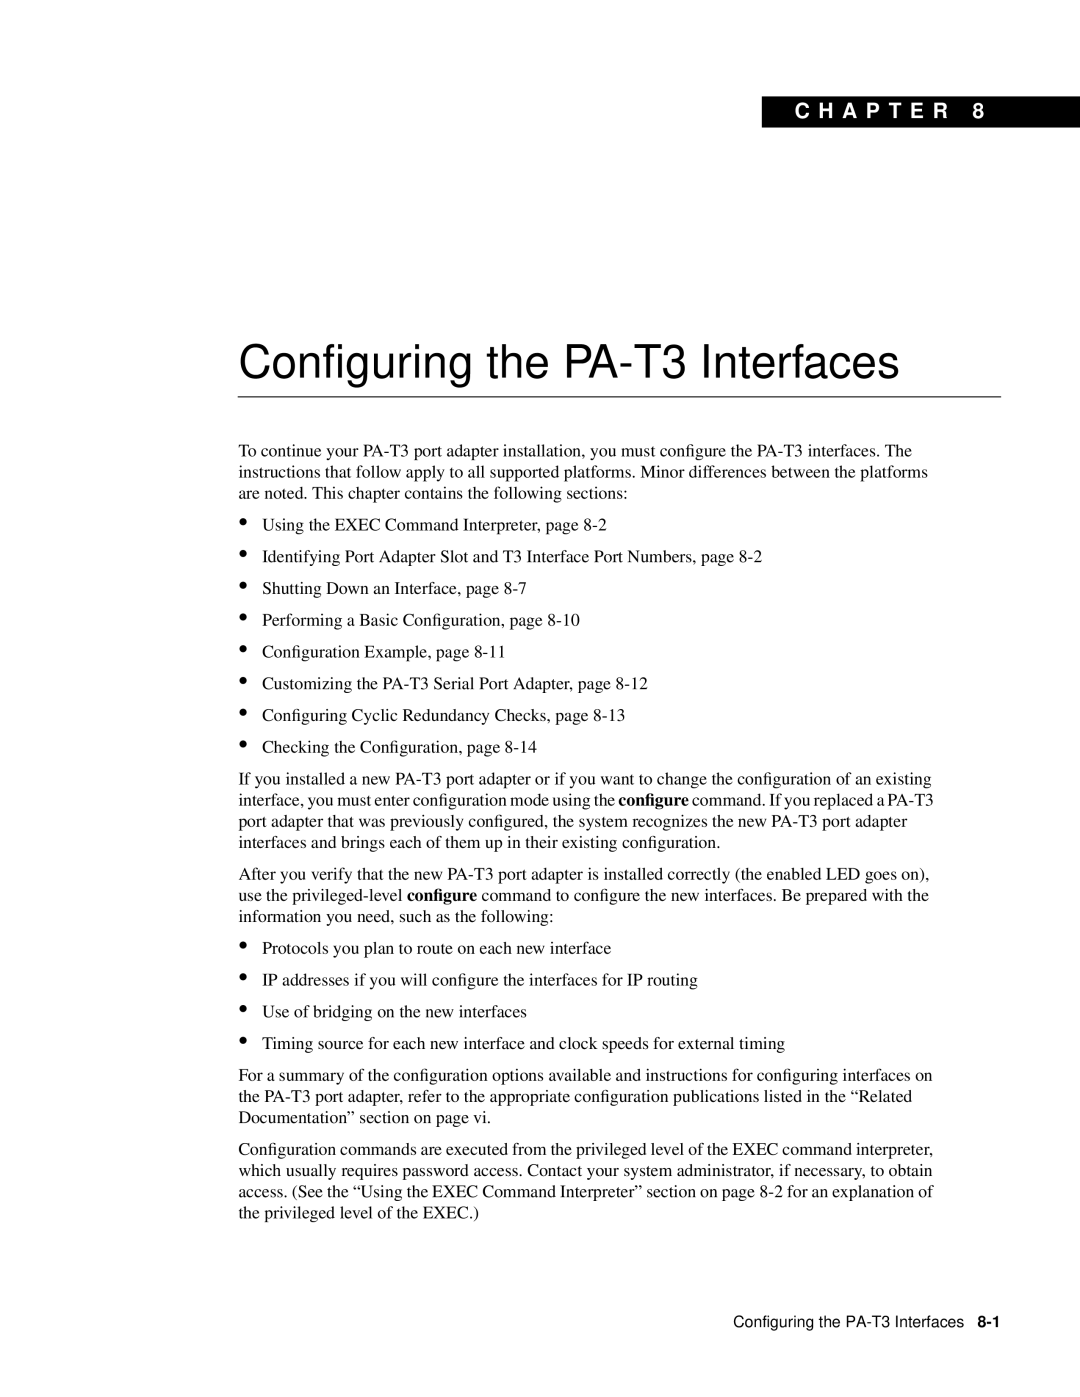 Cisco Systems manual Configuring the PA-T3 Interfaces, C H A P T E R 